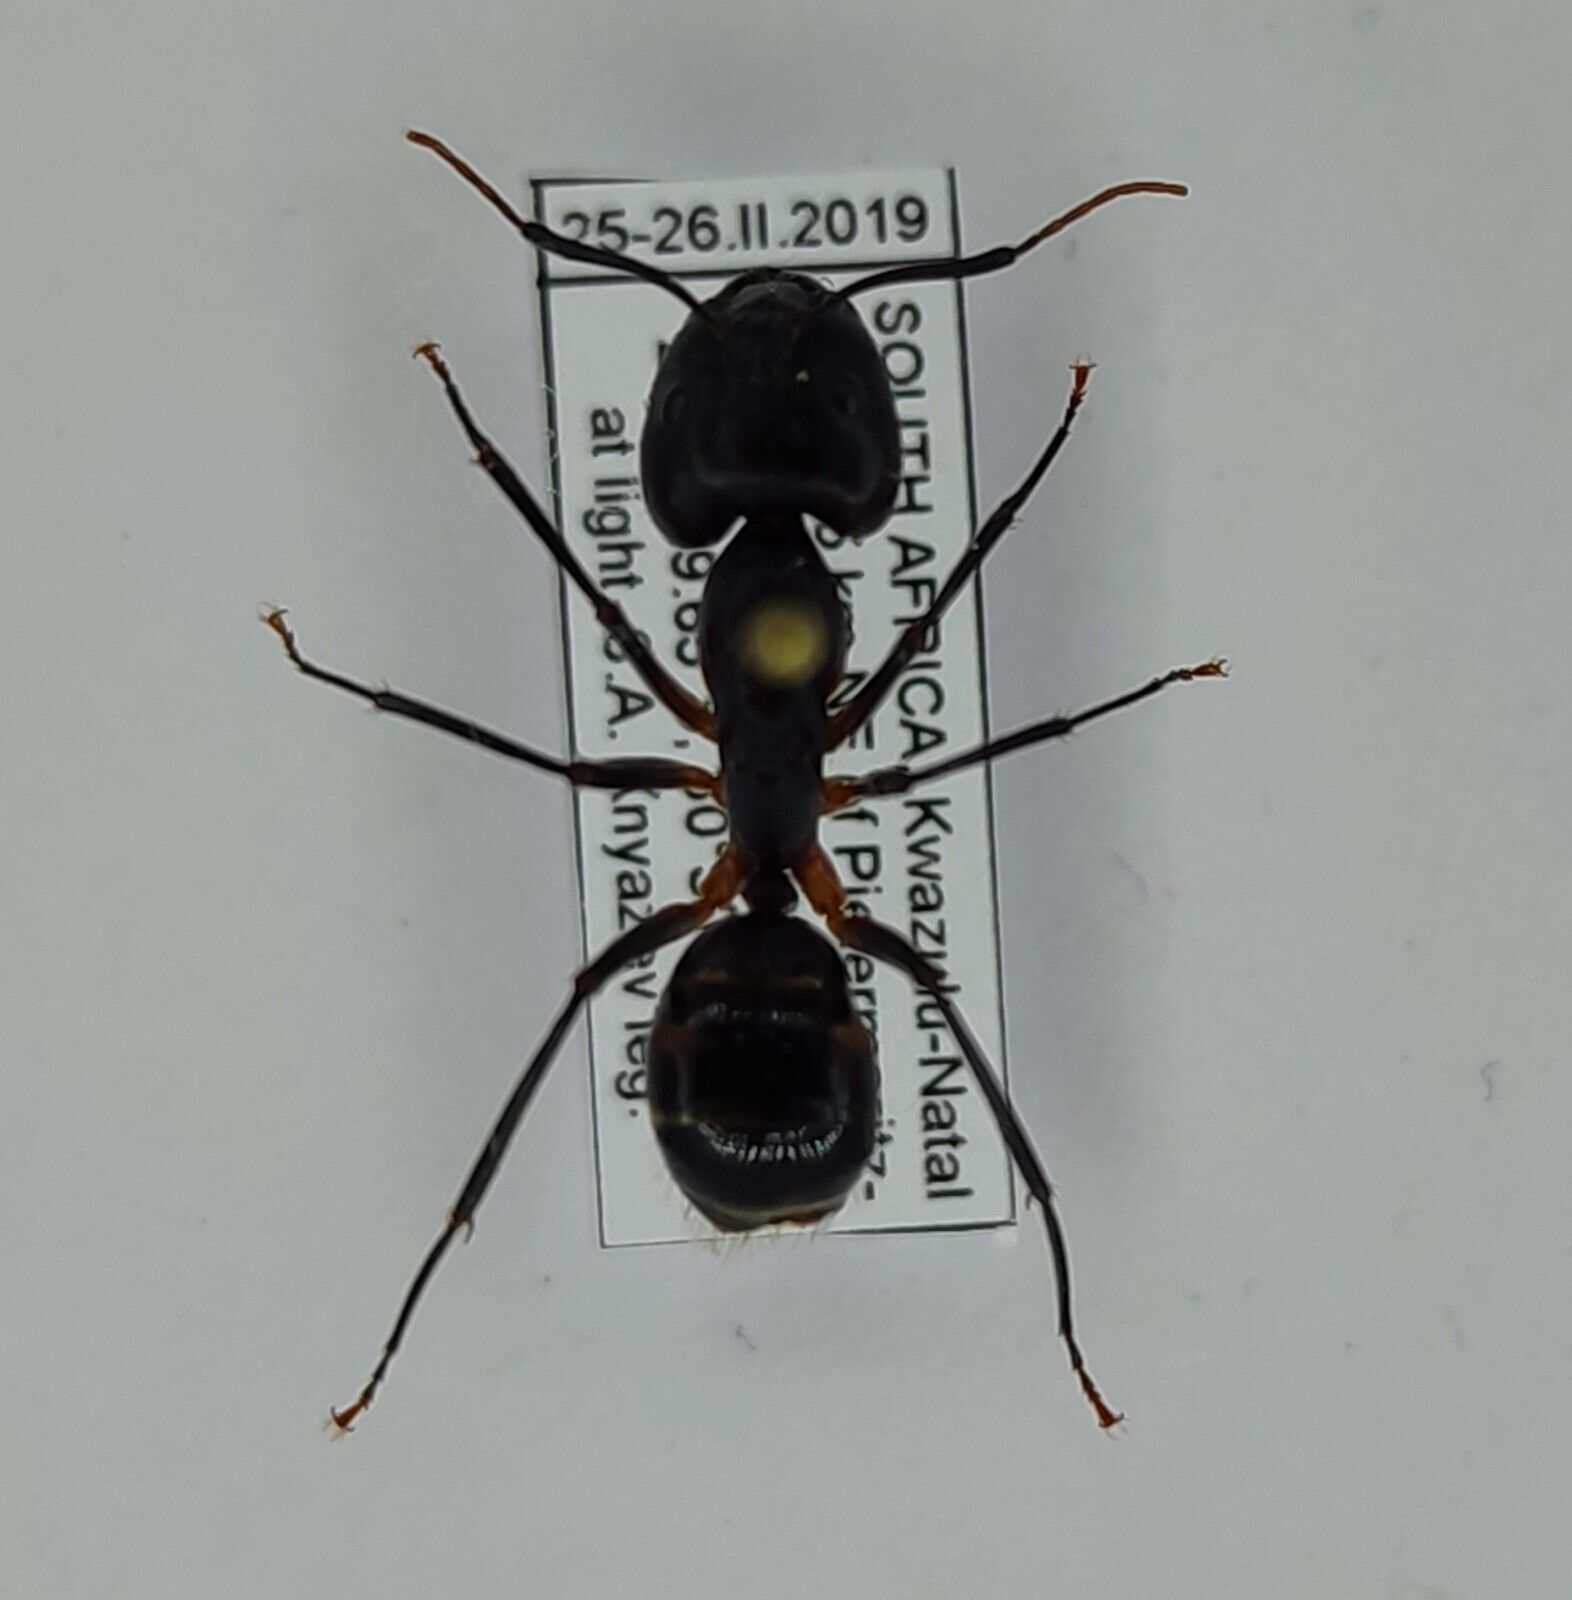 Hymenoptera Formicidae sp. from South Africa